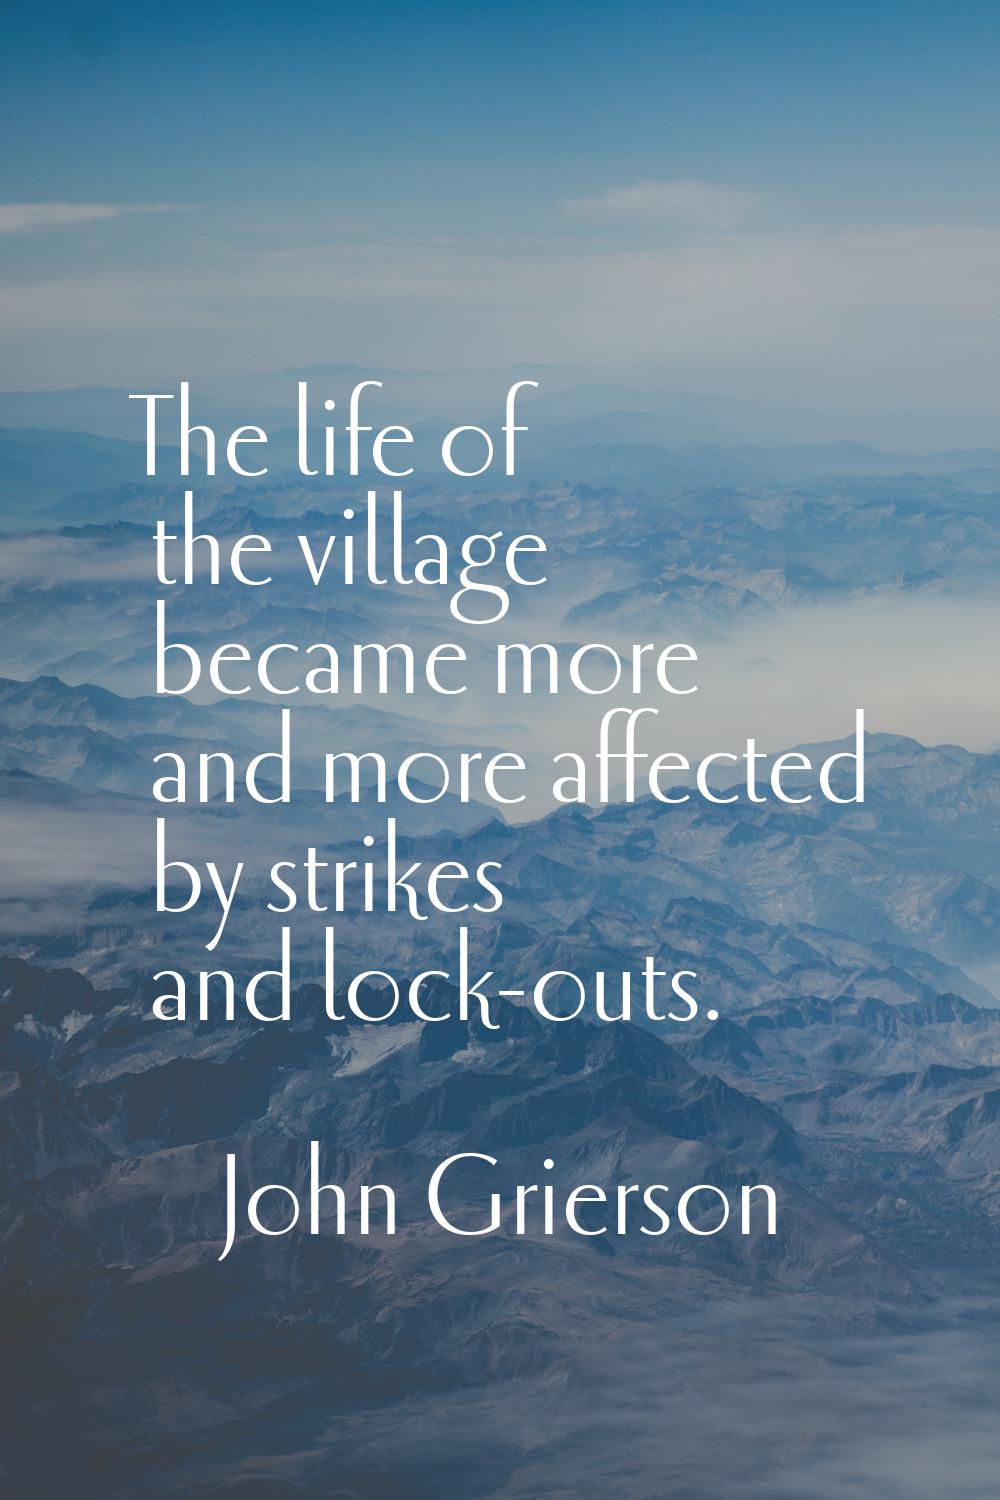 The life of the village became more and more affected by strikes and lock-outs.